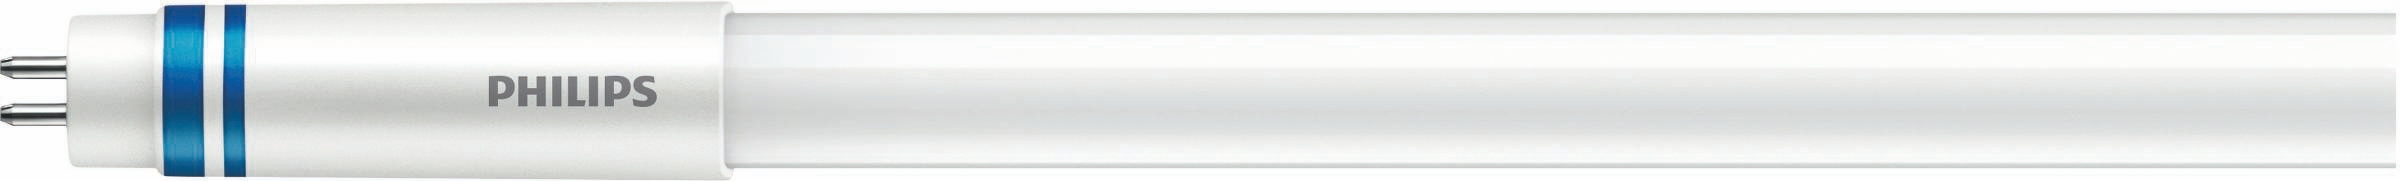 Philips 74957600 MASTER LEDtube T5 InstantFit EVG 1500 mm, 200 °, 26 W, 830, 3700 lm, G5, dimmbar